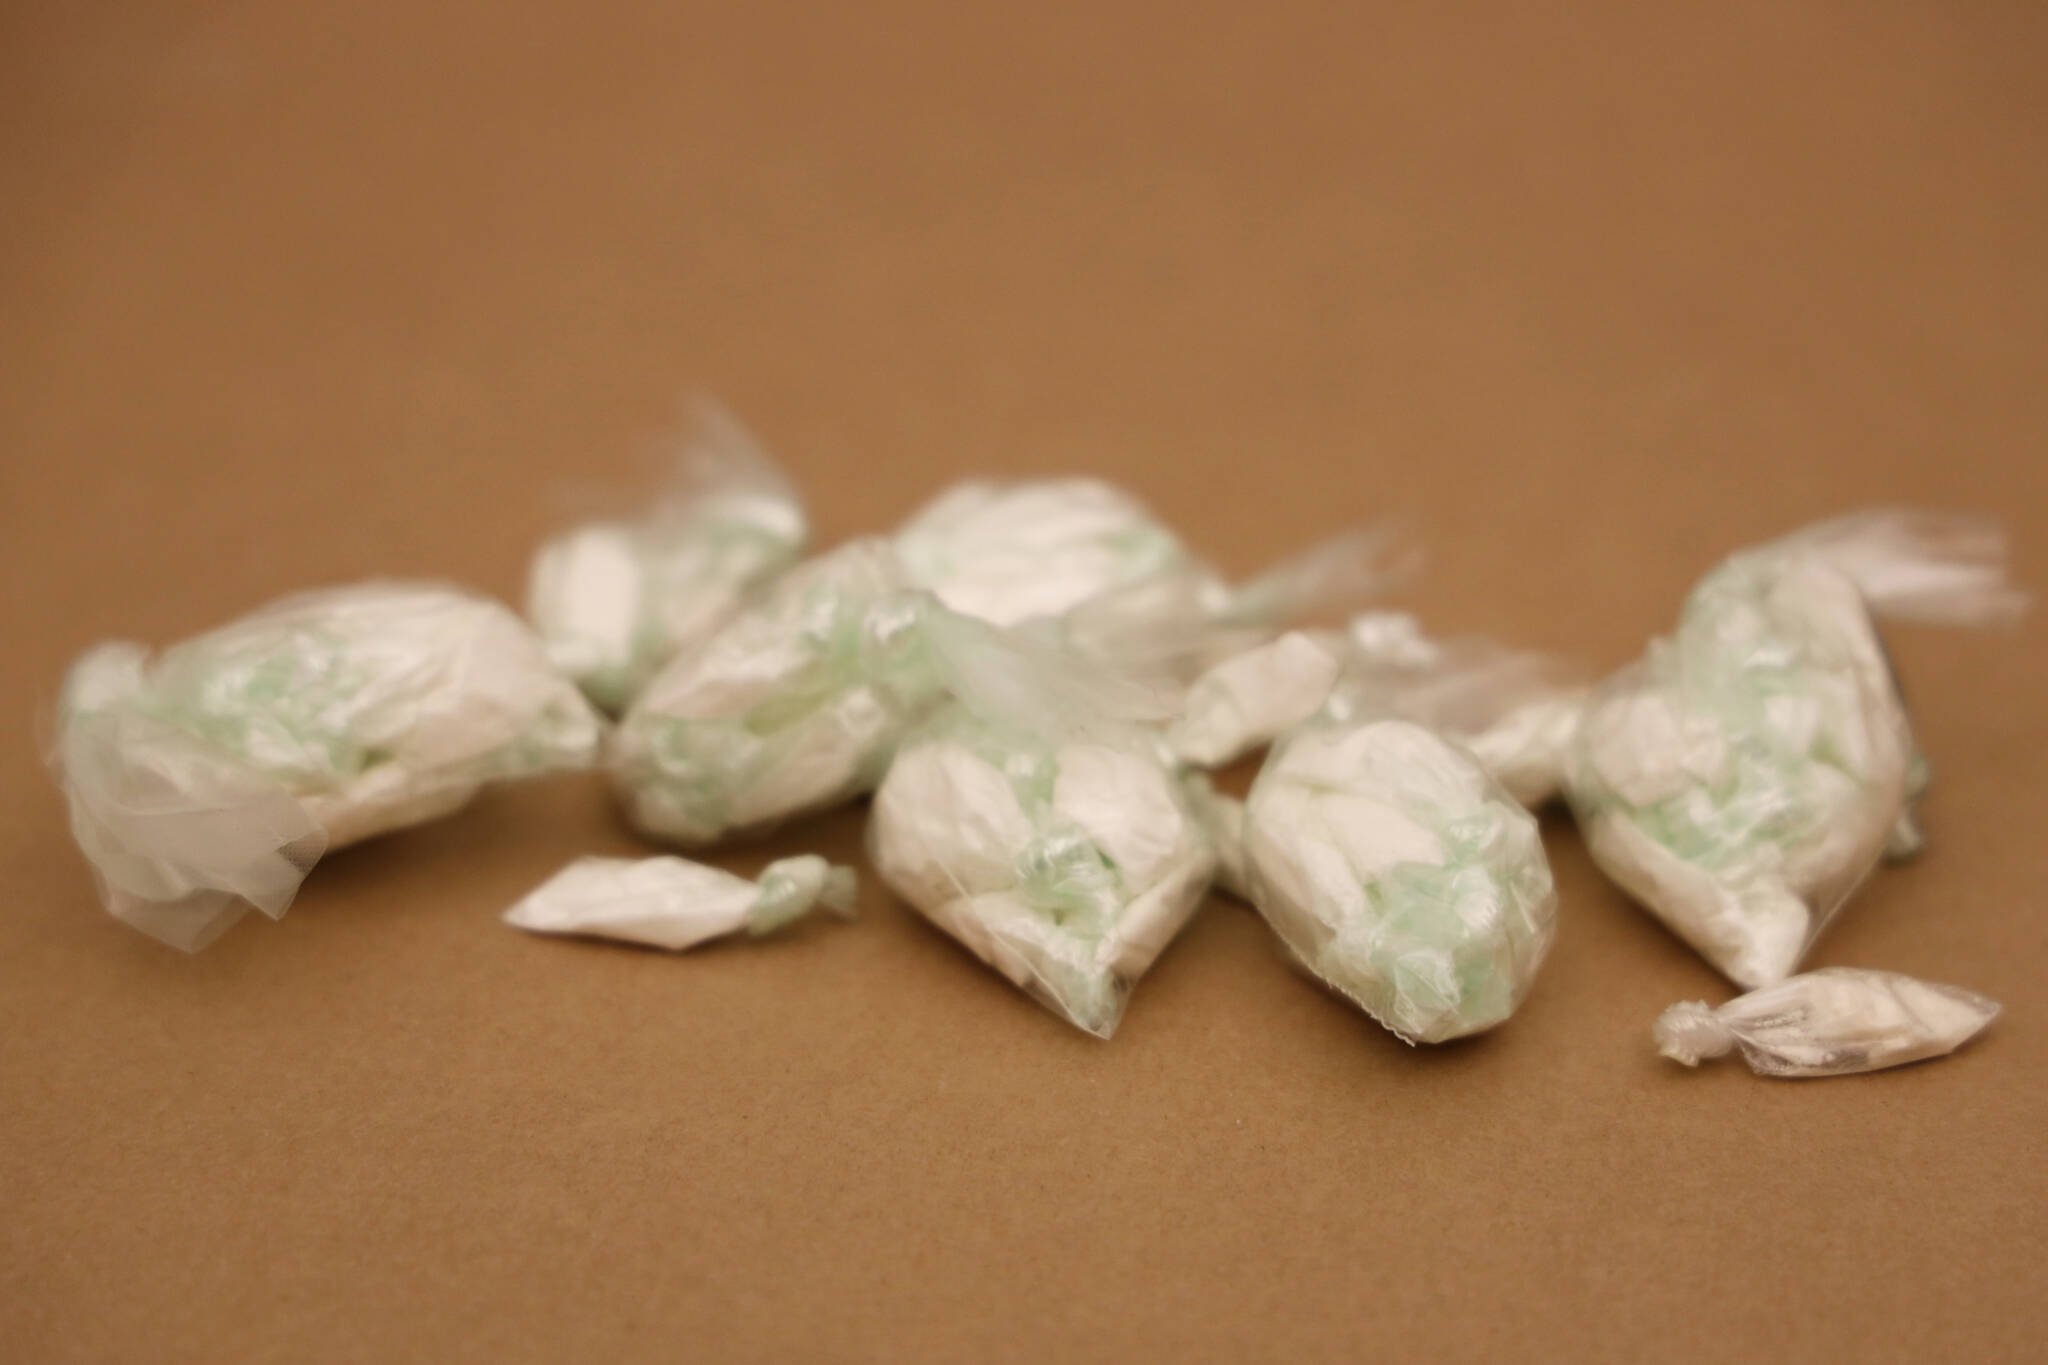 This March 10 photo shows drugs seized by police. A Juneau man was arrested Thursday on felony drug charges and police seized several types of drugs with a street value of $32,650, plus nearly $50,000 in cash. (Clarise Larson / Juneau Empire File)